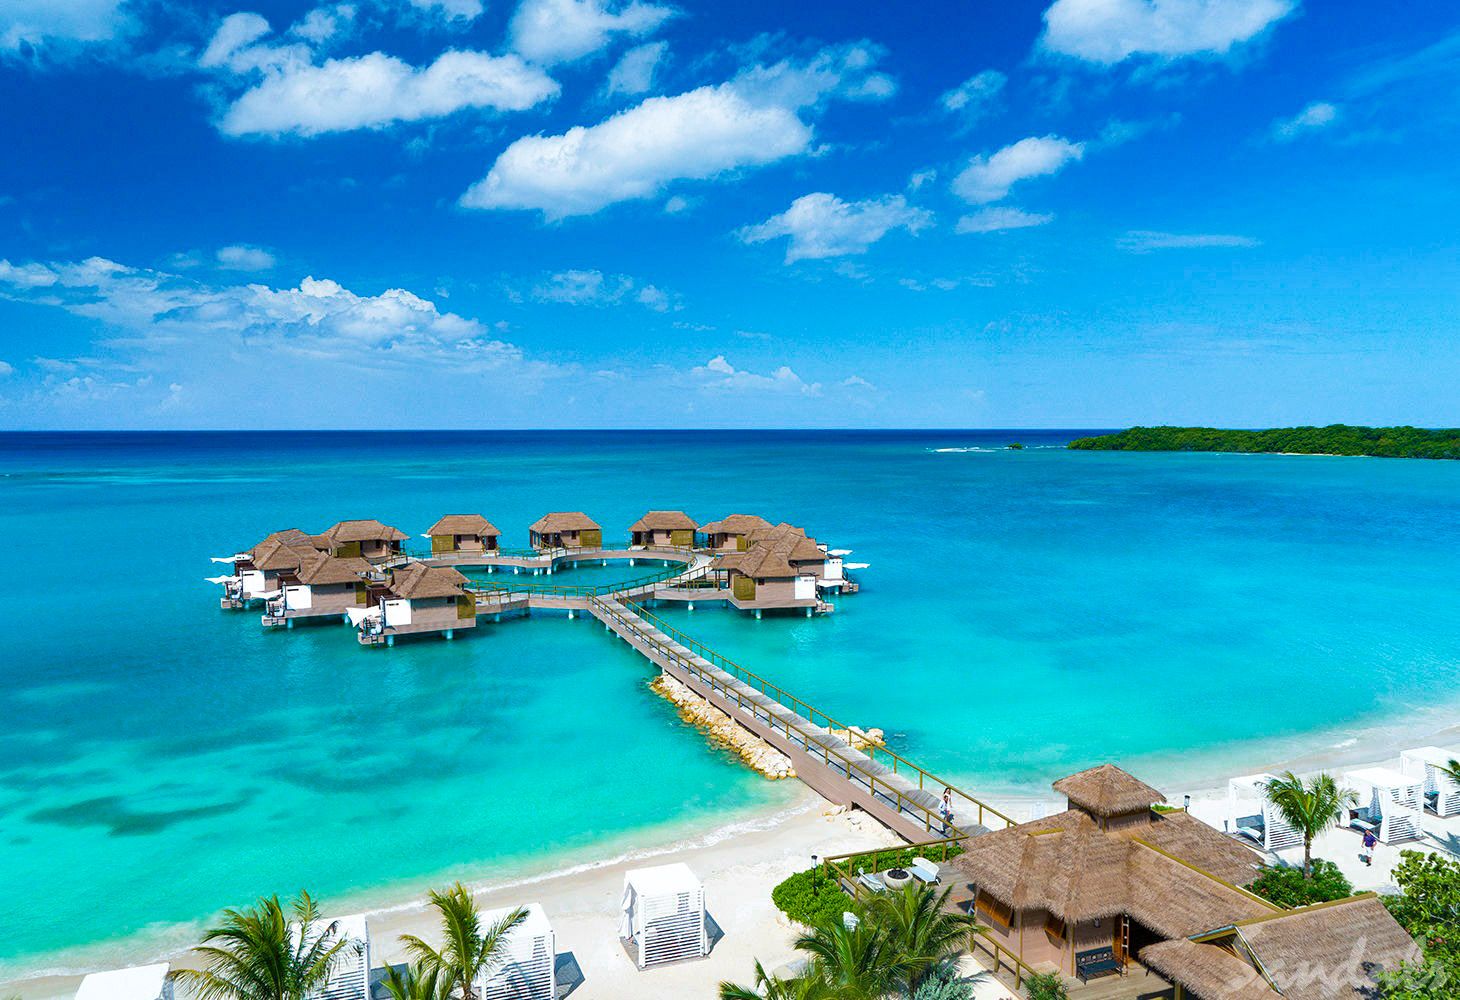 Which Sandals Resort Has The Best Beach - Dreams and Destinations Travel